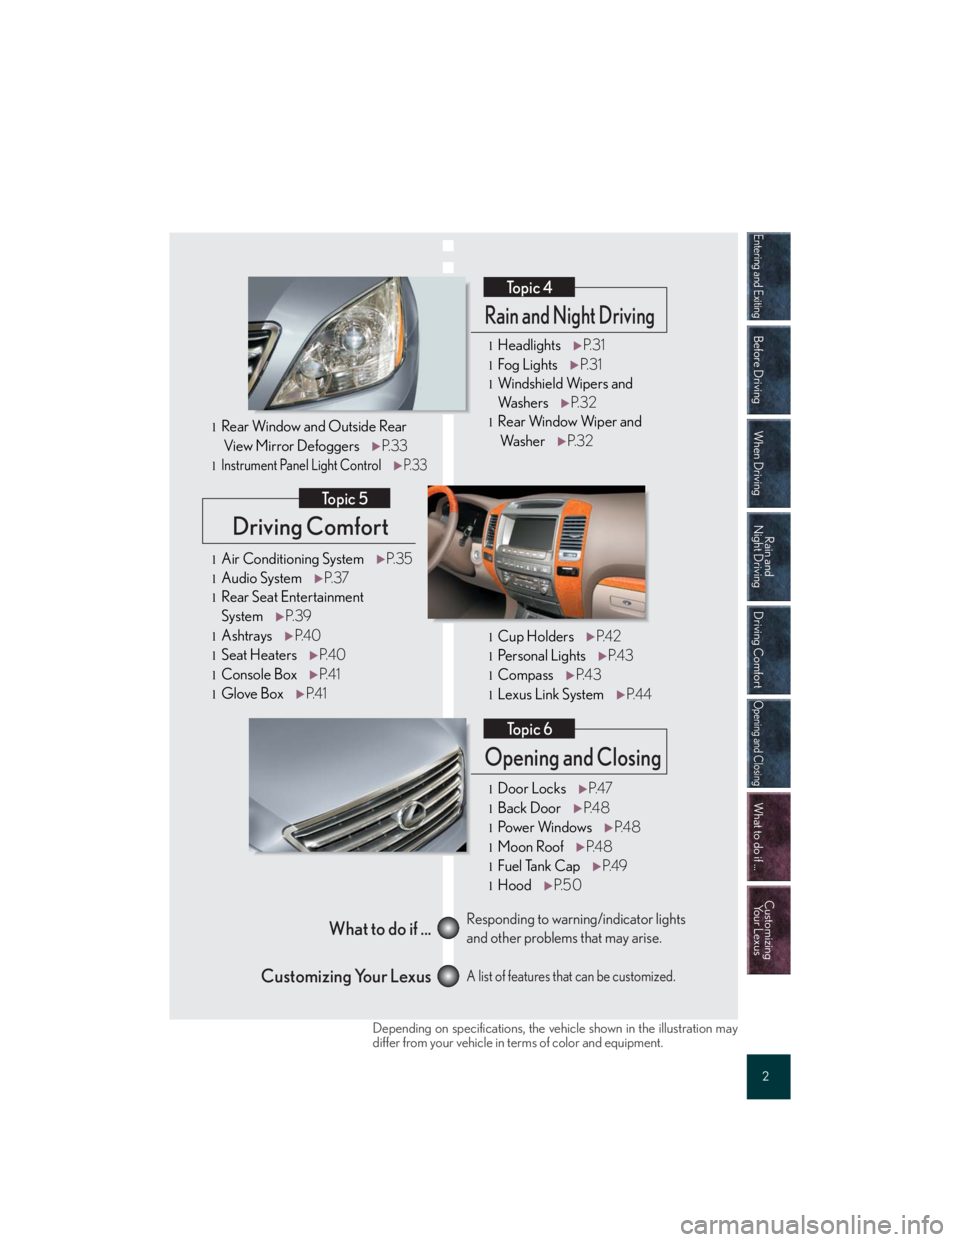 Lexus GX470 2007  Using other driving systems / LEXUS 2007 GX470 QUICK REFERENCE MANUAL Entering and Exiting
Before Driving
When Driving
Rain and 
Night Driving
Driving Comfort
Opening and Closing
What to do if ...
Customizing
Yo u r  L e x u s
2
Driving Comfort
Topic 5
Opening and Closi